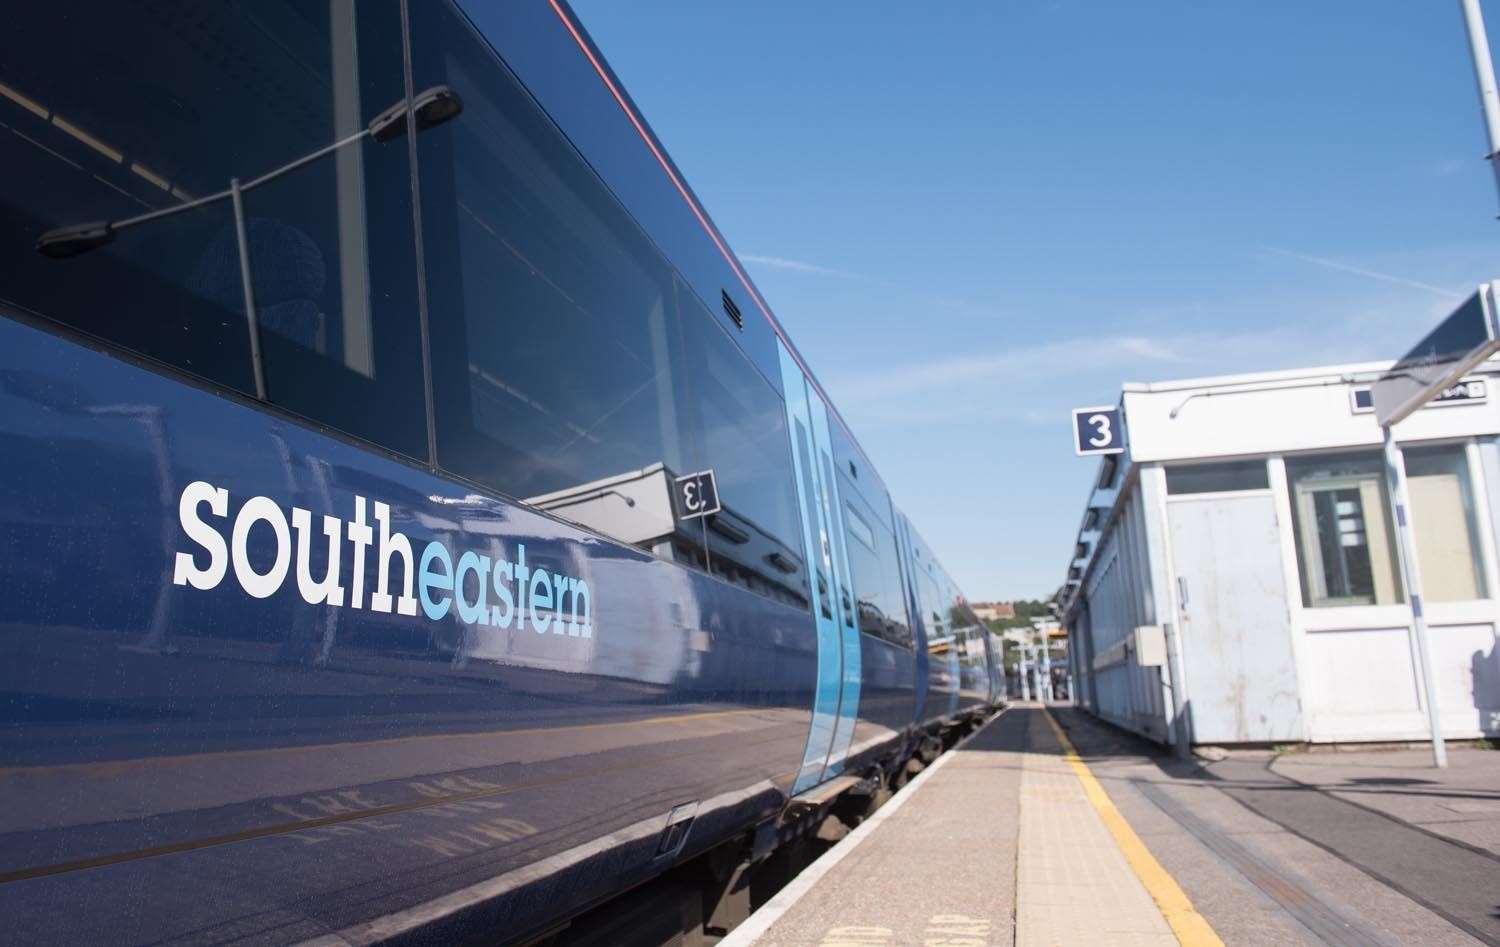 Southeastern services will increase as of this week